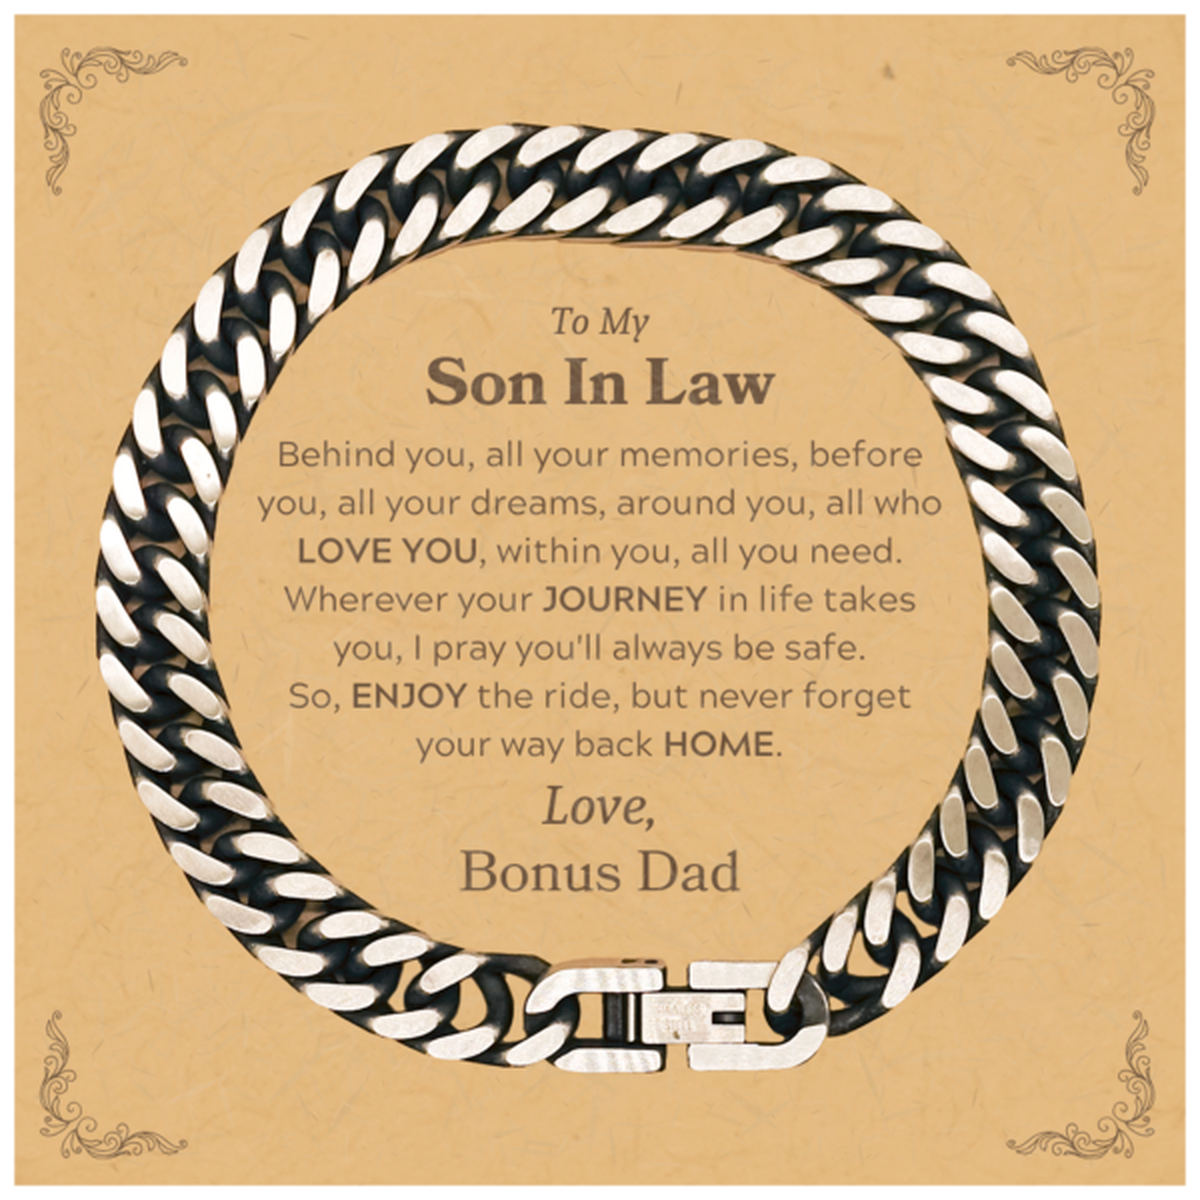 To My Son In Law Graduation Gifts from Bonus Dad, Son In Law Cuban Link Chain Bracelet Christmas Birthday Gifts for Son In Law Behind you, all your memories, before you, all your dreams. Love, Bonus Dad